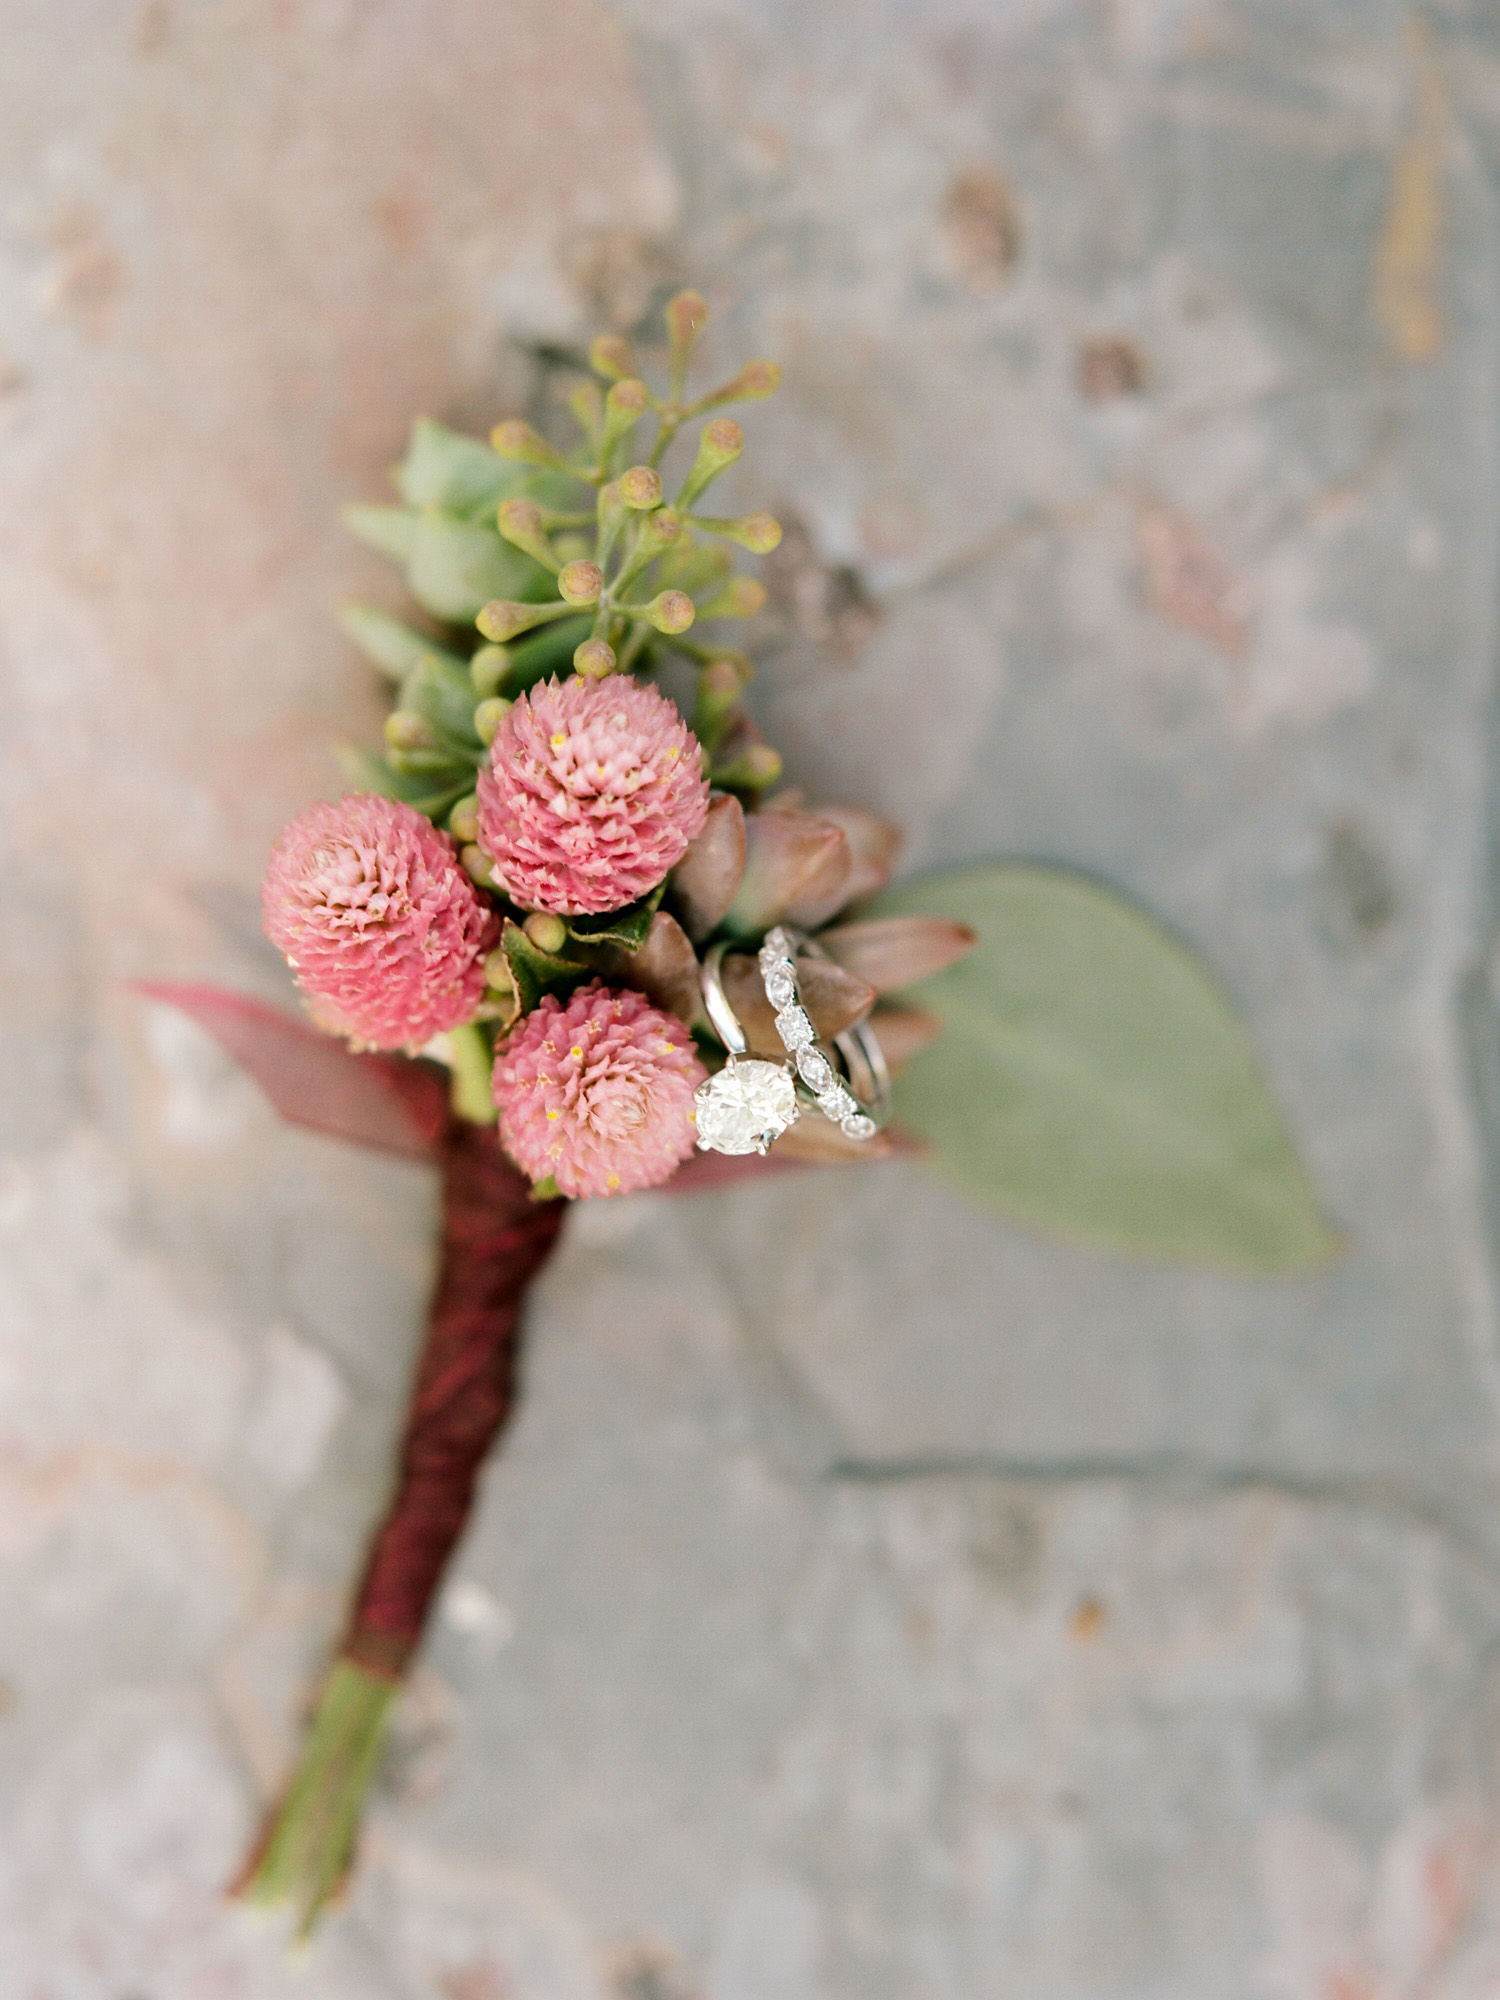 Maroon and green boutonnière with wedding bands from a backyard wedding photographed by Mary Dougherty